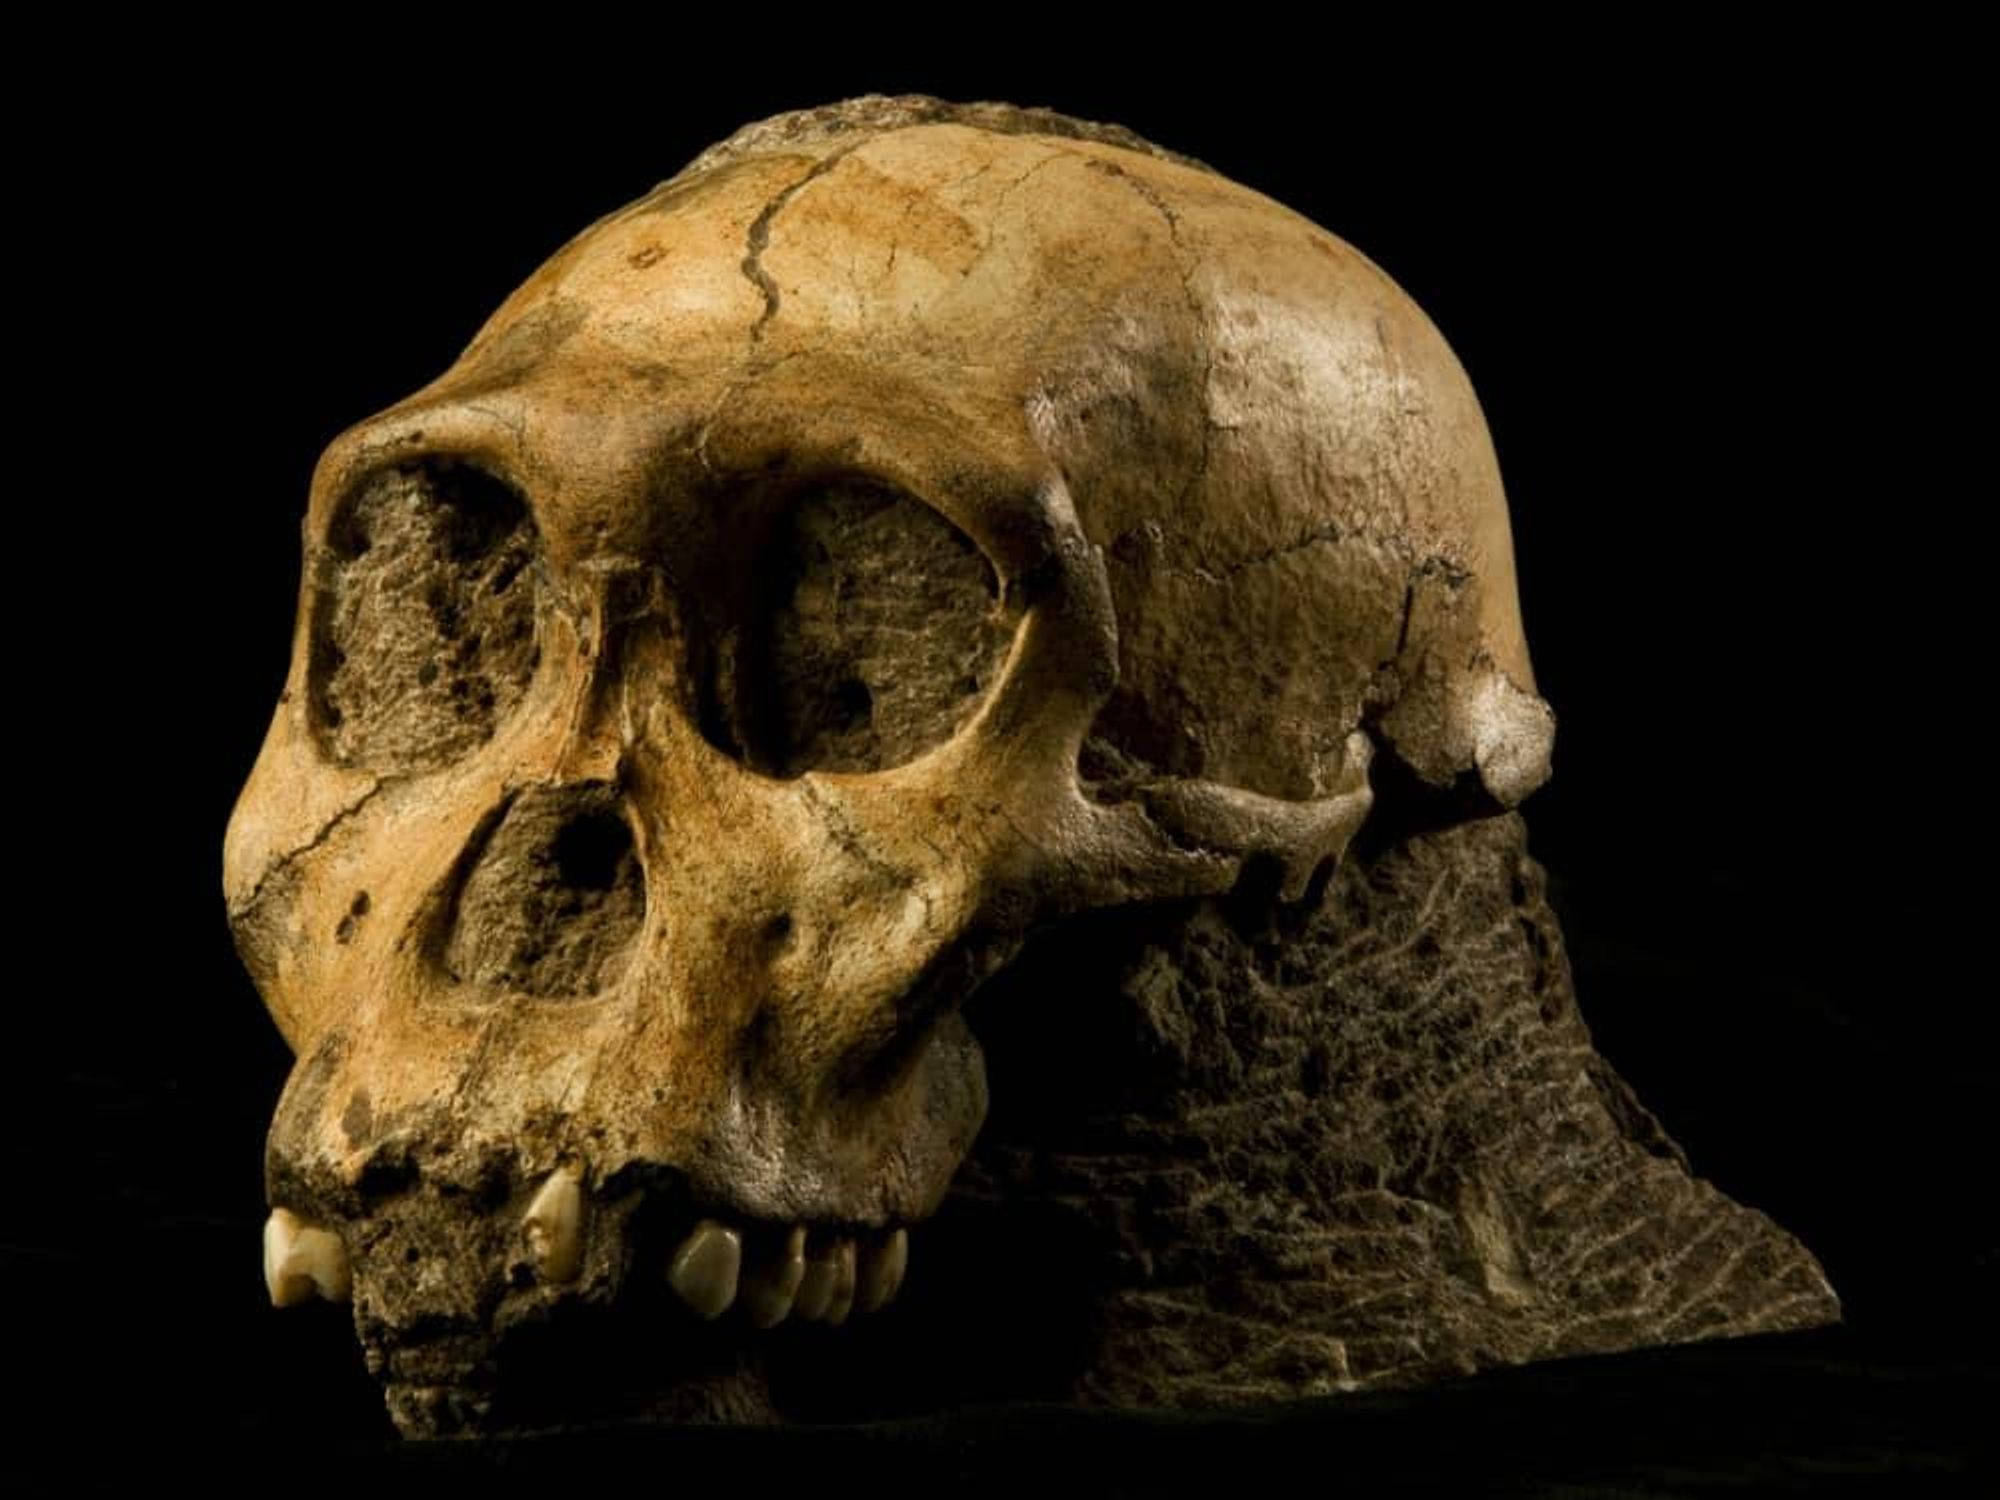 Origins: Fossils from the Cradle of Humankind